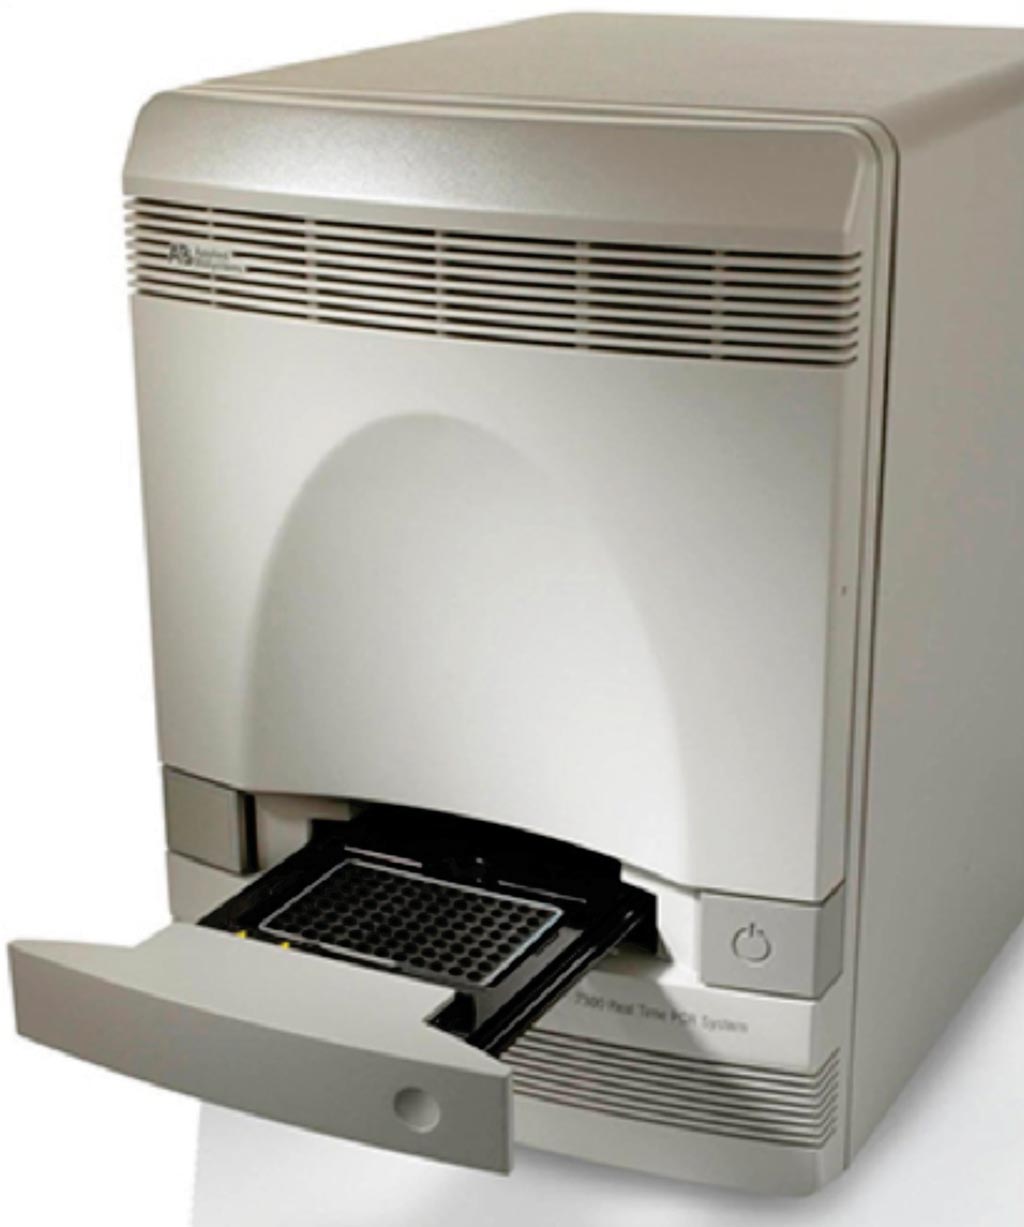 Image: The ABI 7300 real-time PCR system (Photo courtesy of Applied Biosystems).